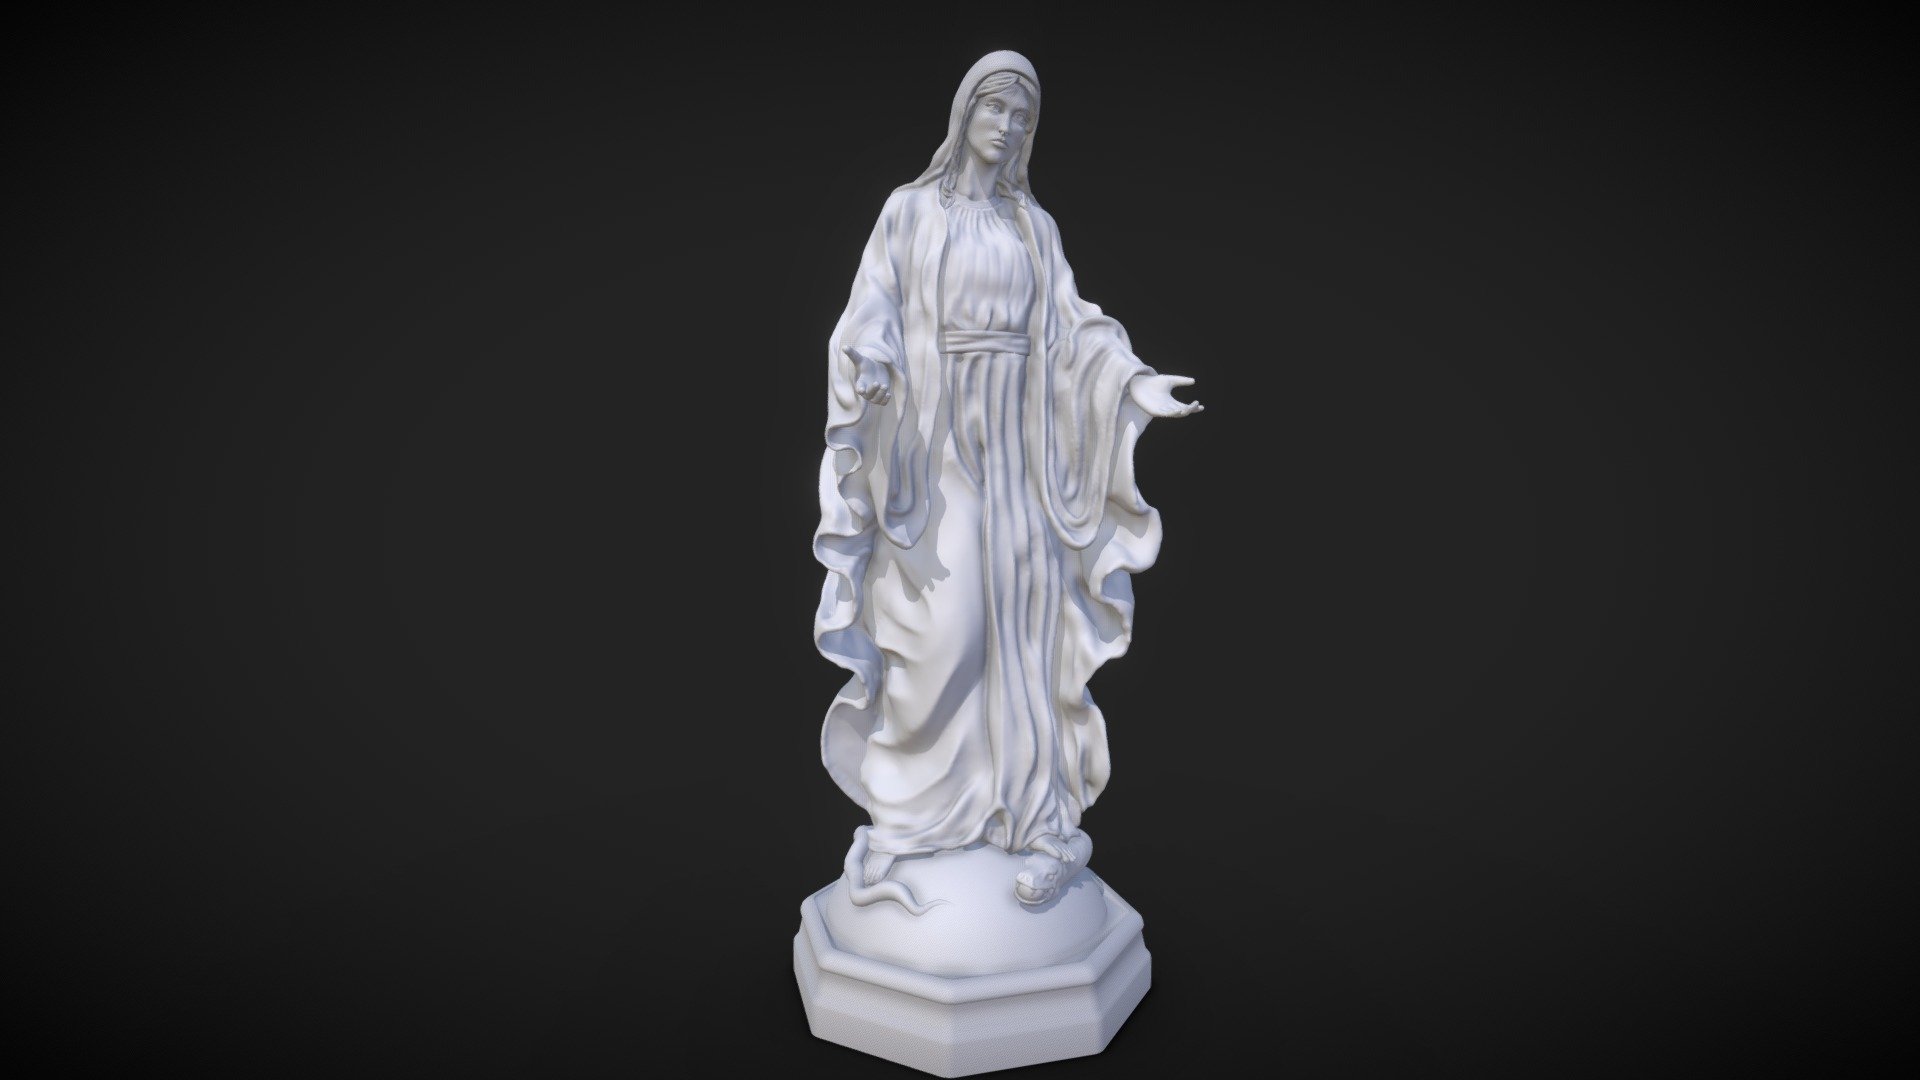 A Statue of the Blessed Virgin Mary to be 3D printed - Virgin Mary Statue - 3D model by Bryan T (@BT73) 3d model